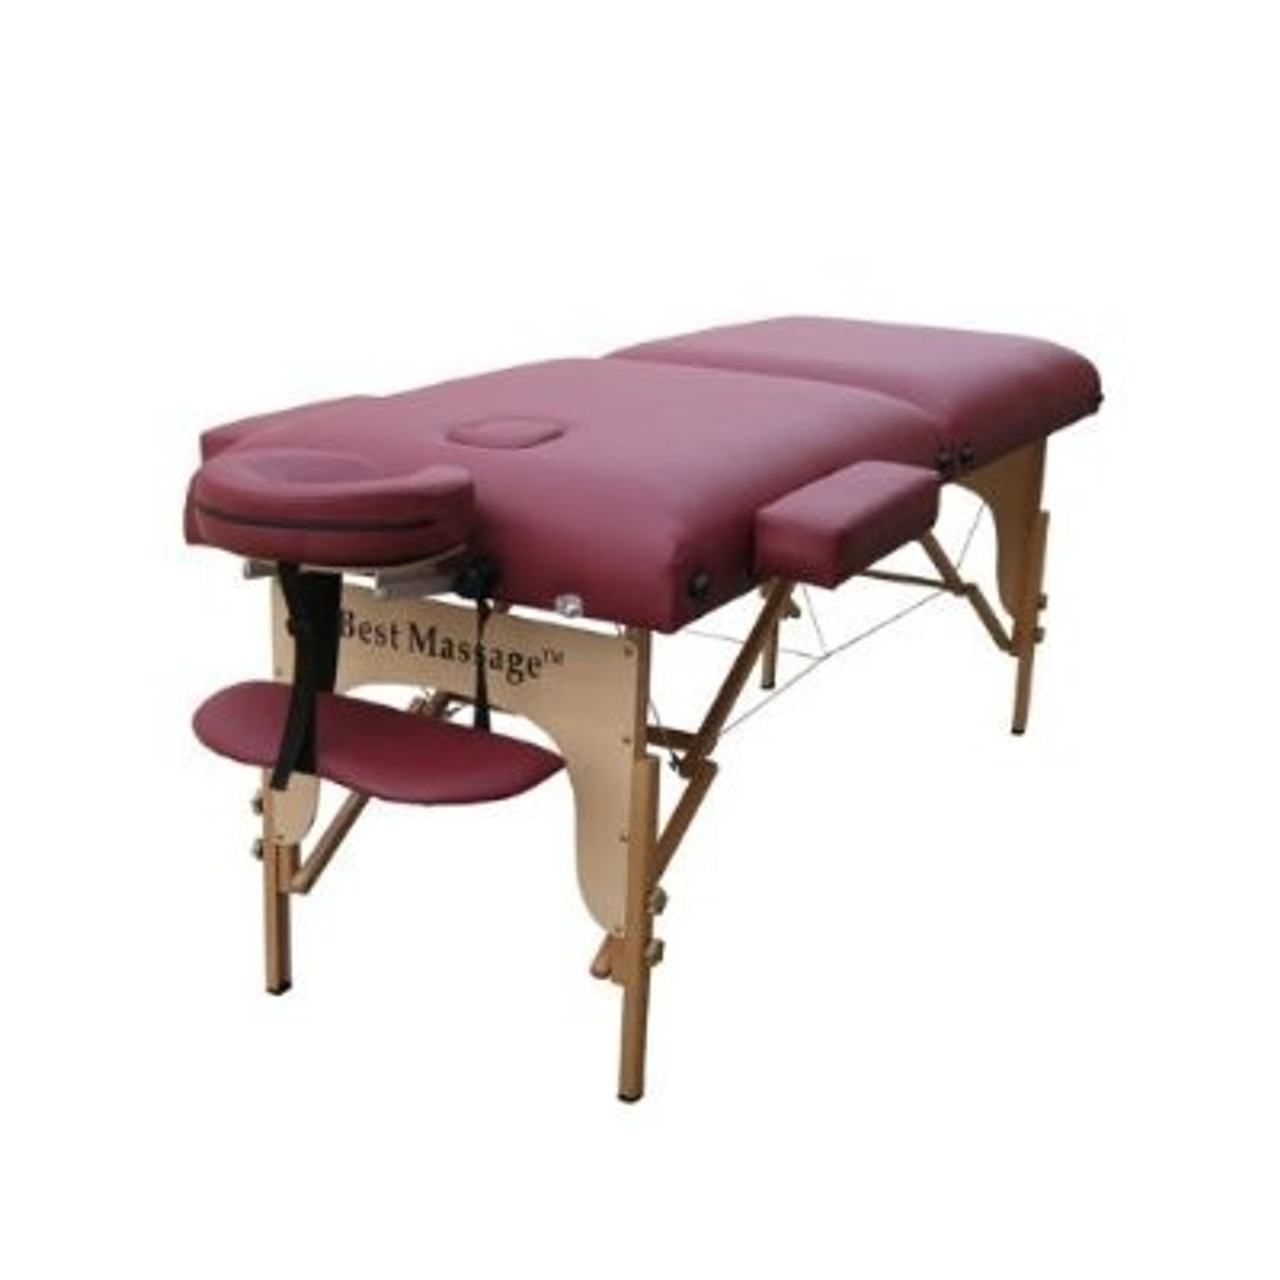 Portable Massage table-Includes Free Carry Case and Free Half round pillow